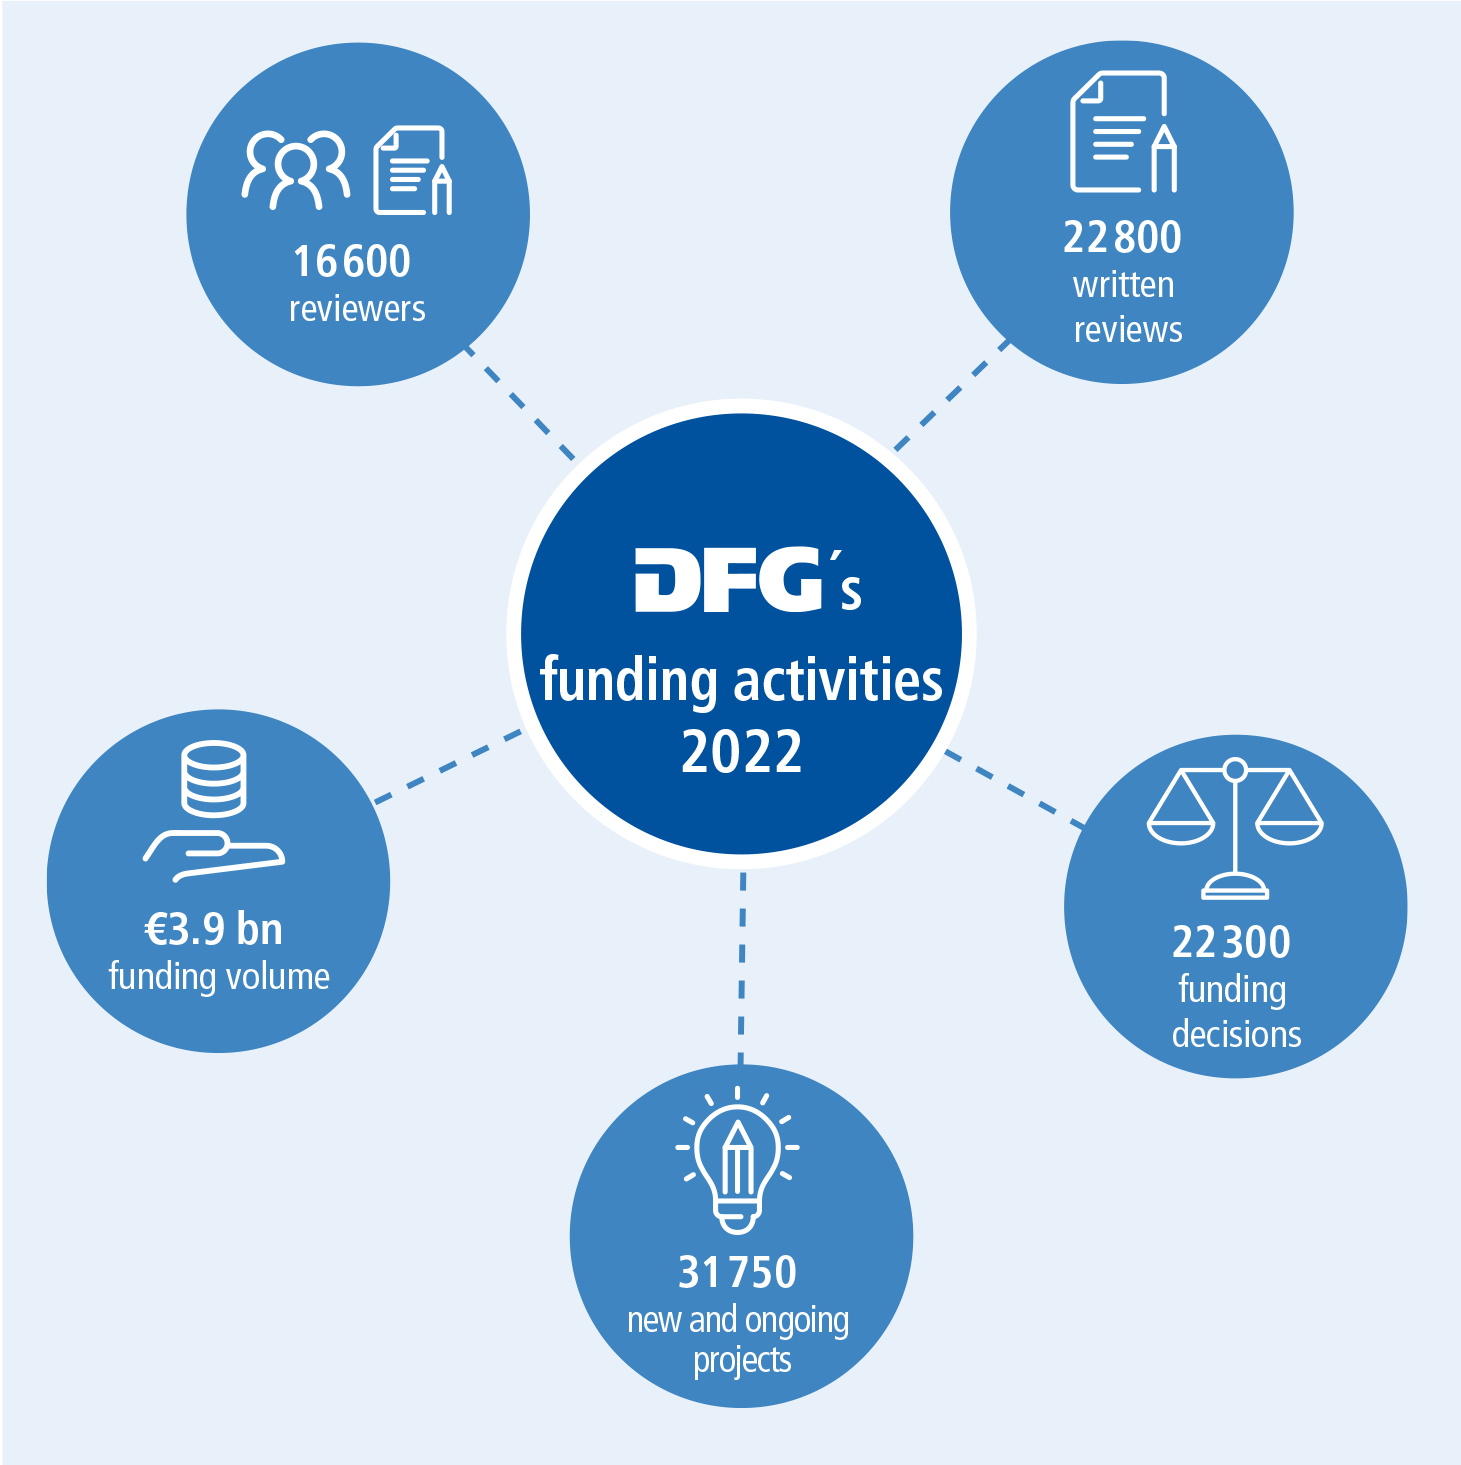 Graphic from the Annual Report 2022: The DFG's funding activities in 2022